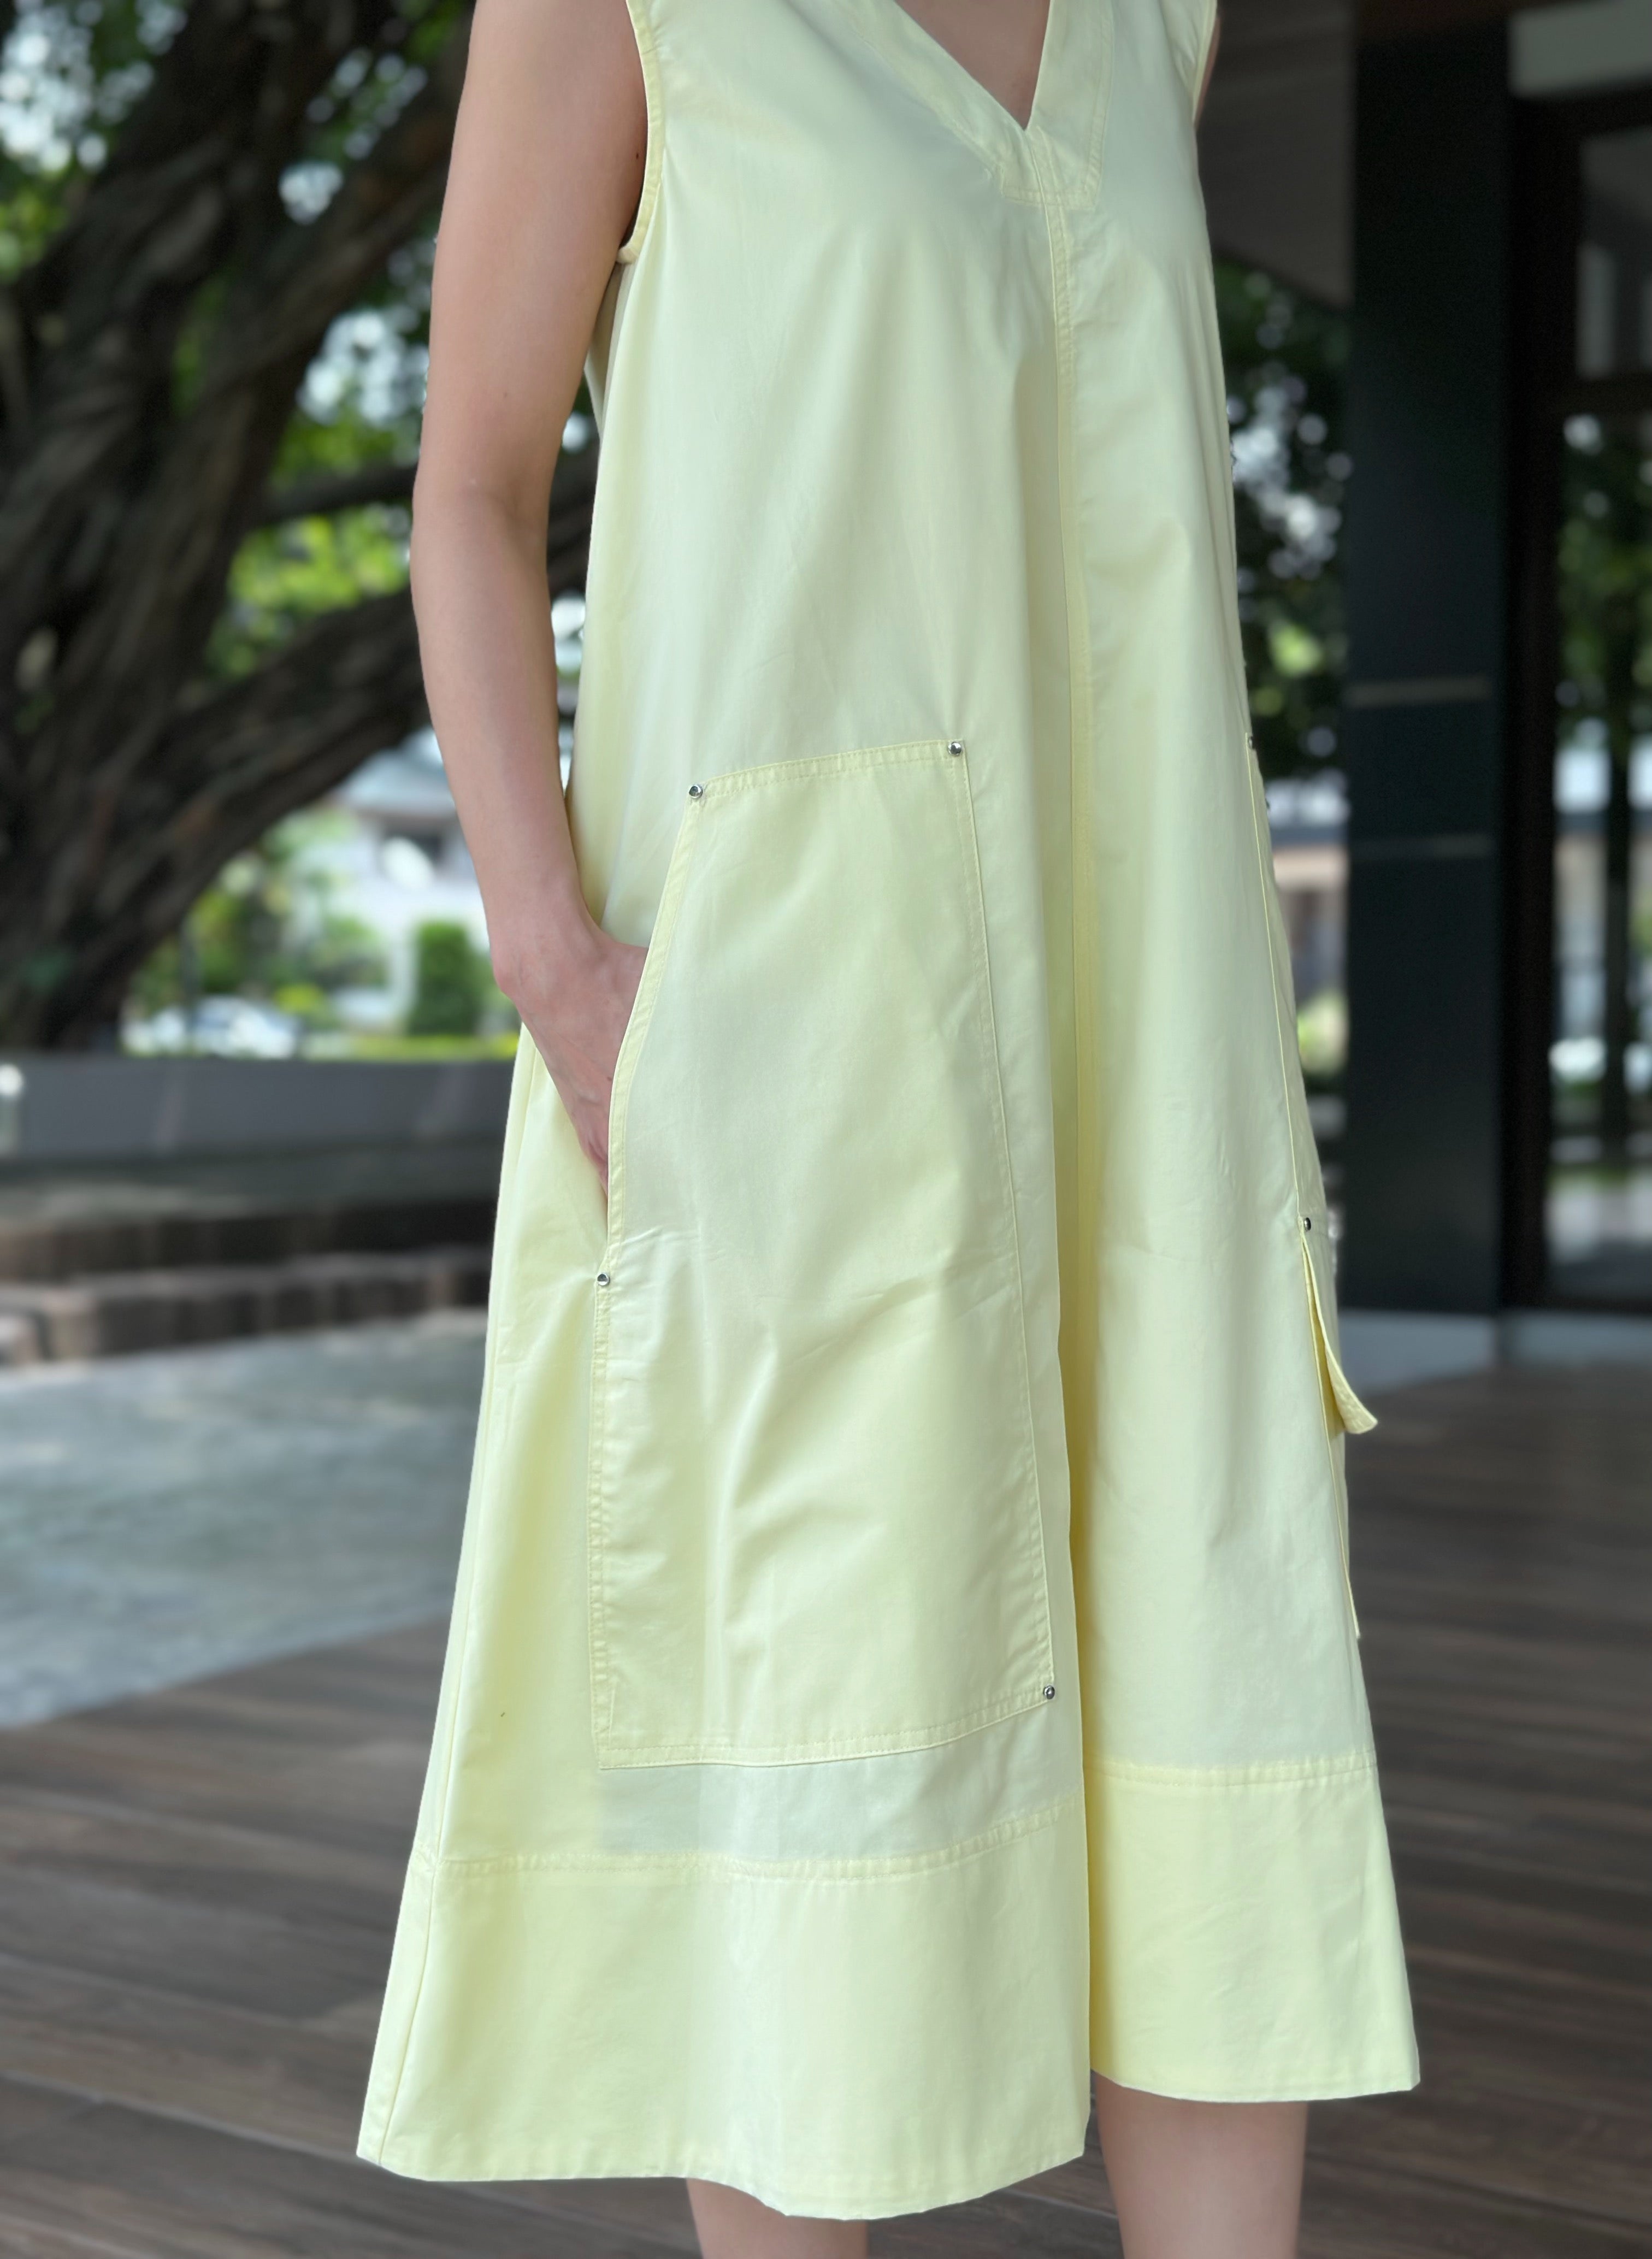 Bubley Sleevless Dress in Yellow